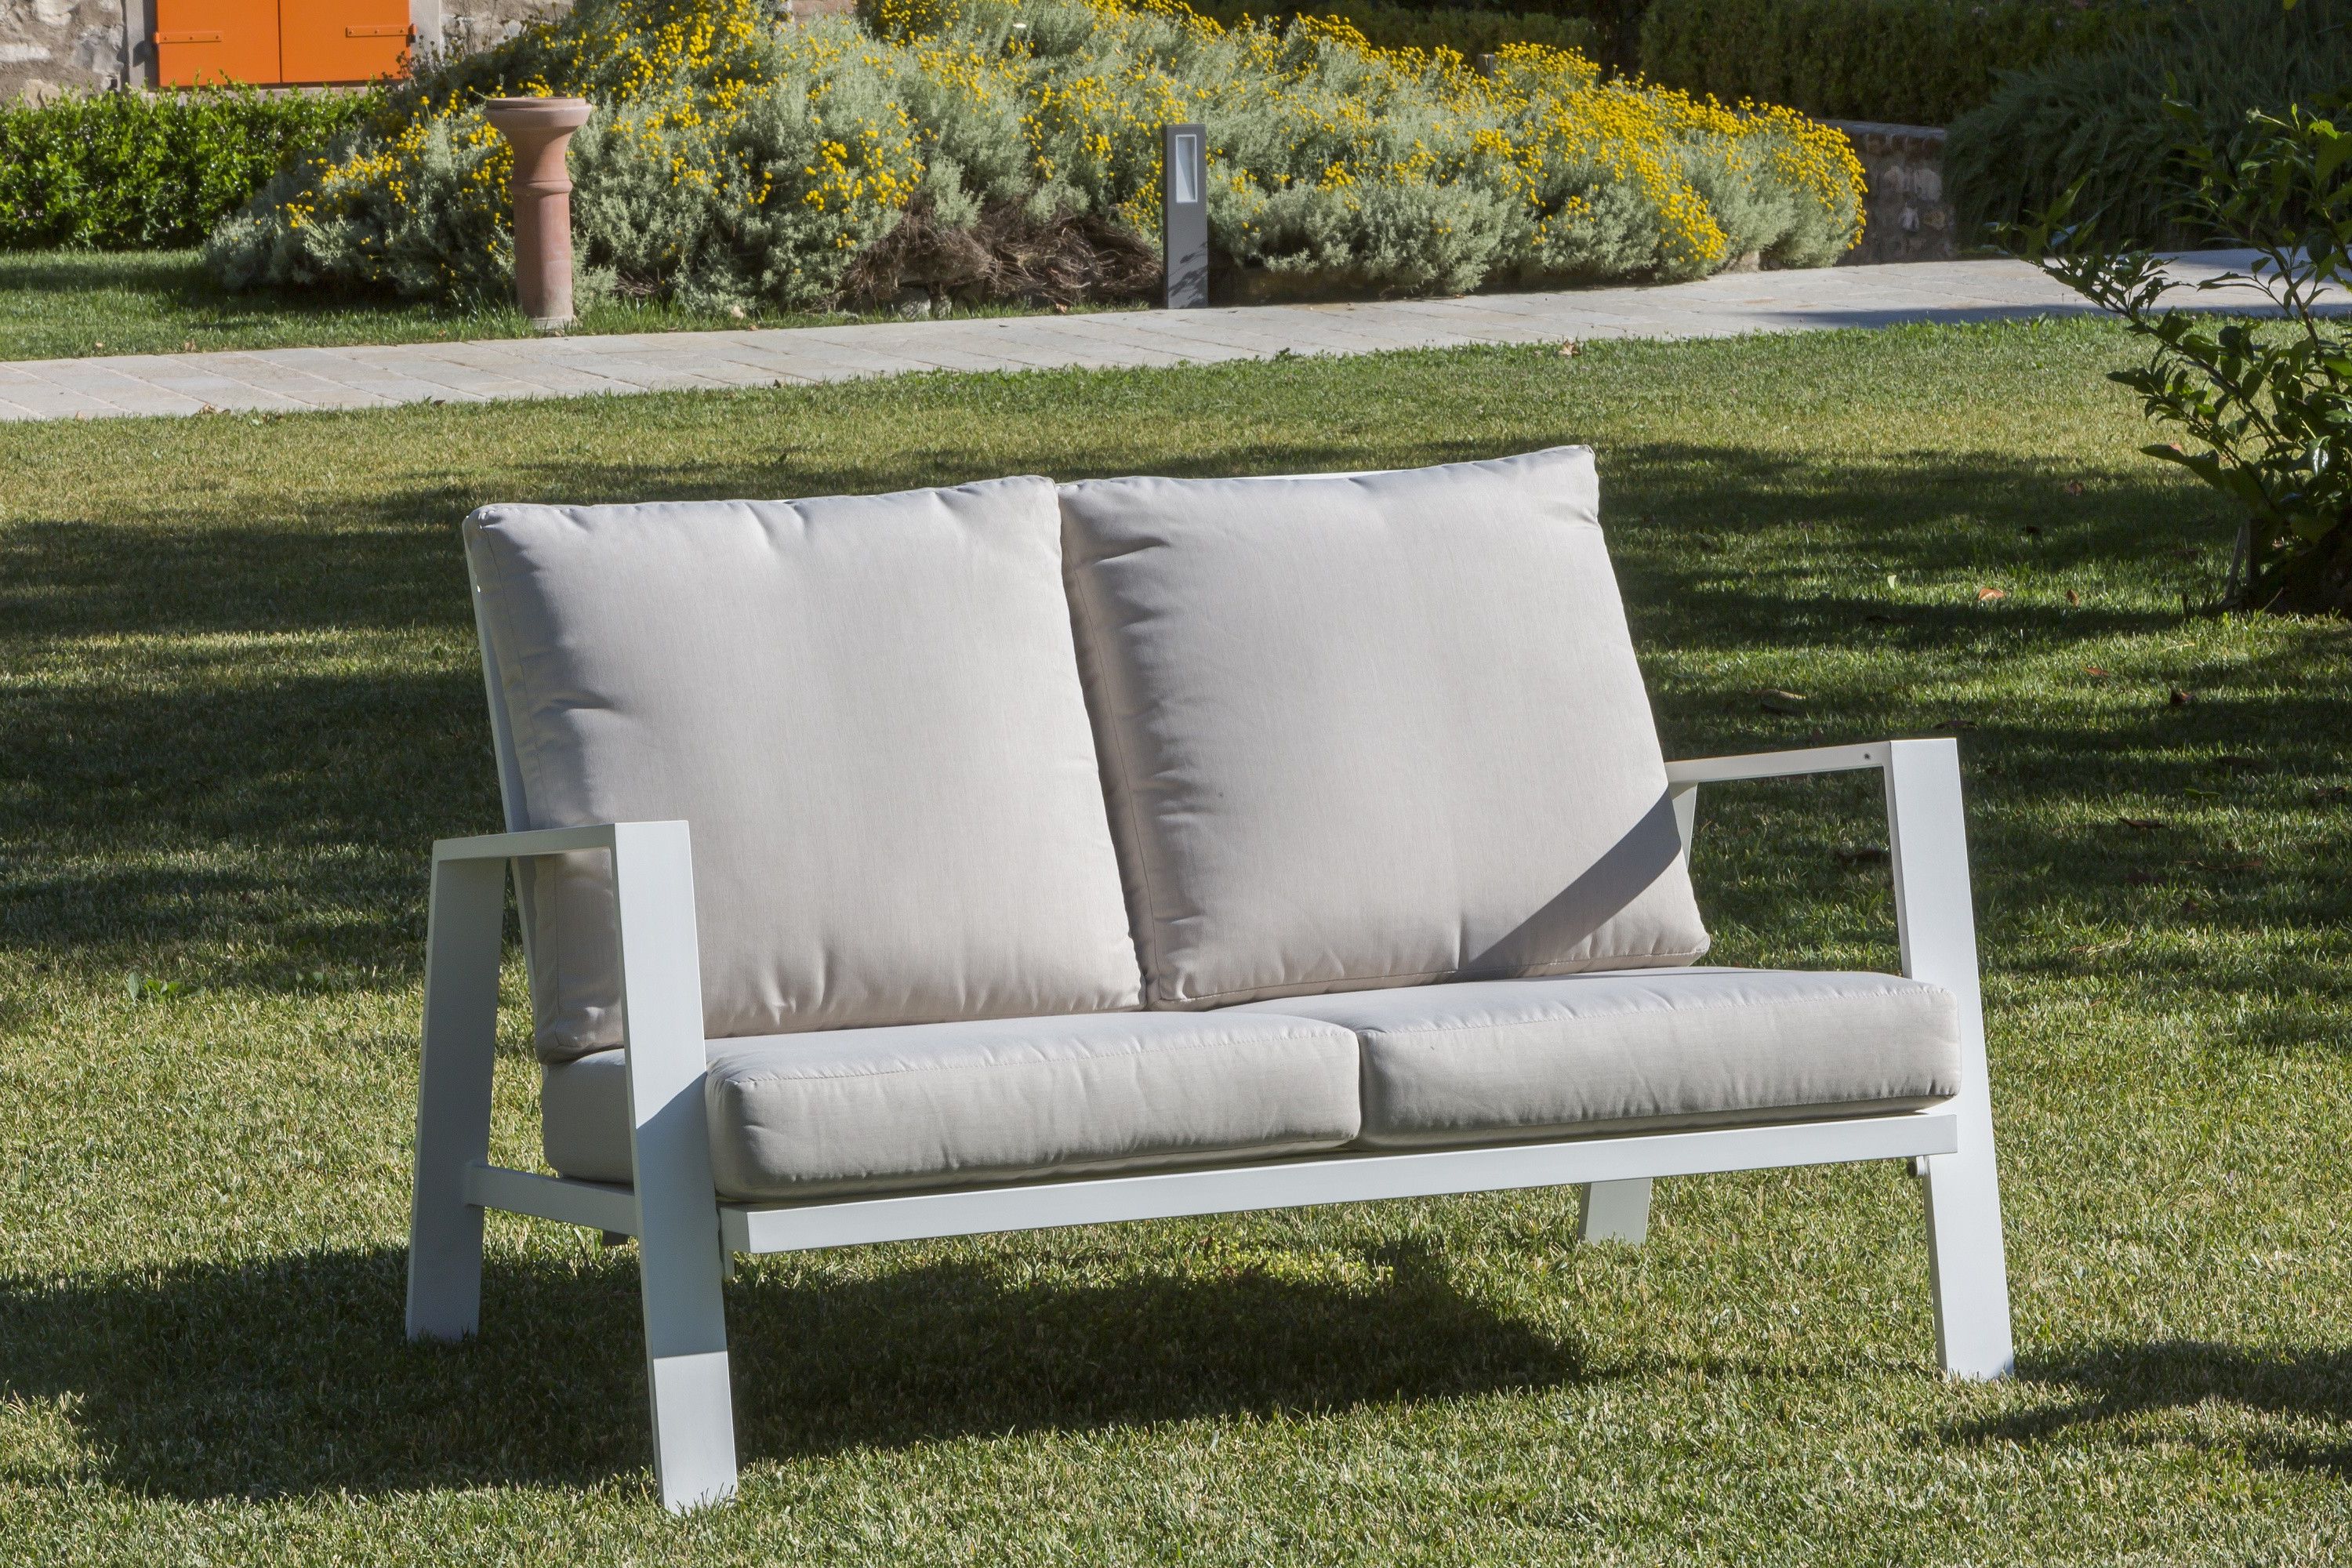 Outdoor Sand Cushions Loveseats Regarding 2020 Lipari White Aluminum Lounge Set And Sand Cushions For Outdoors And Indoors (View 4 of 15)